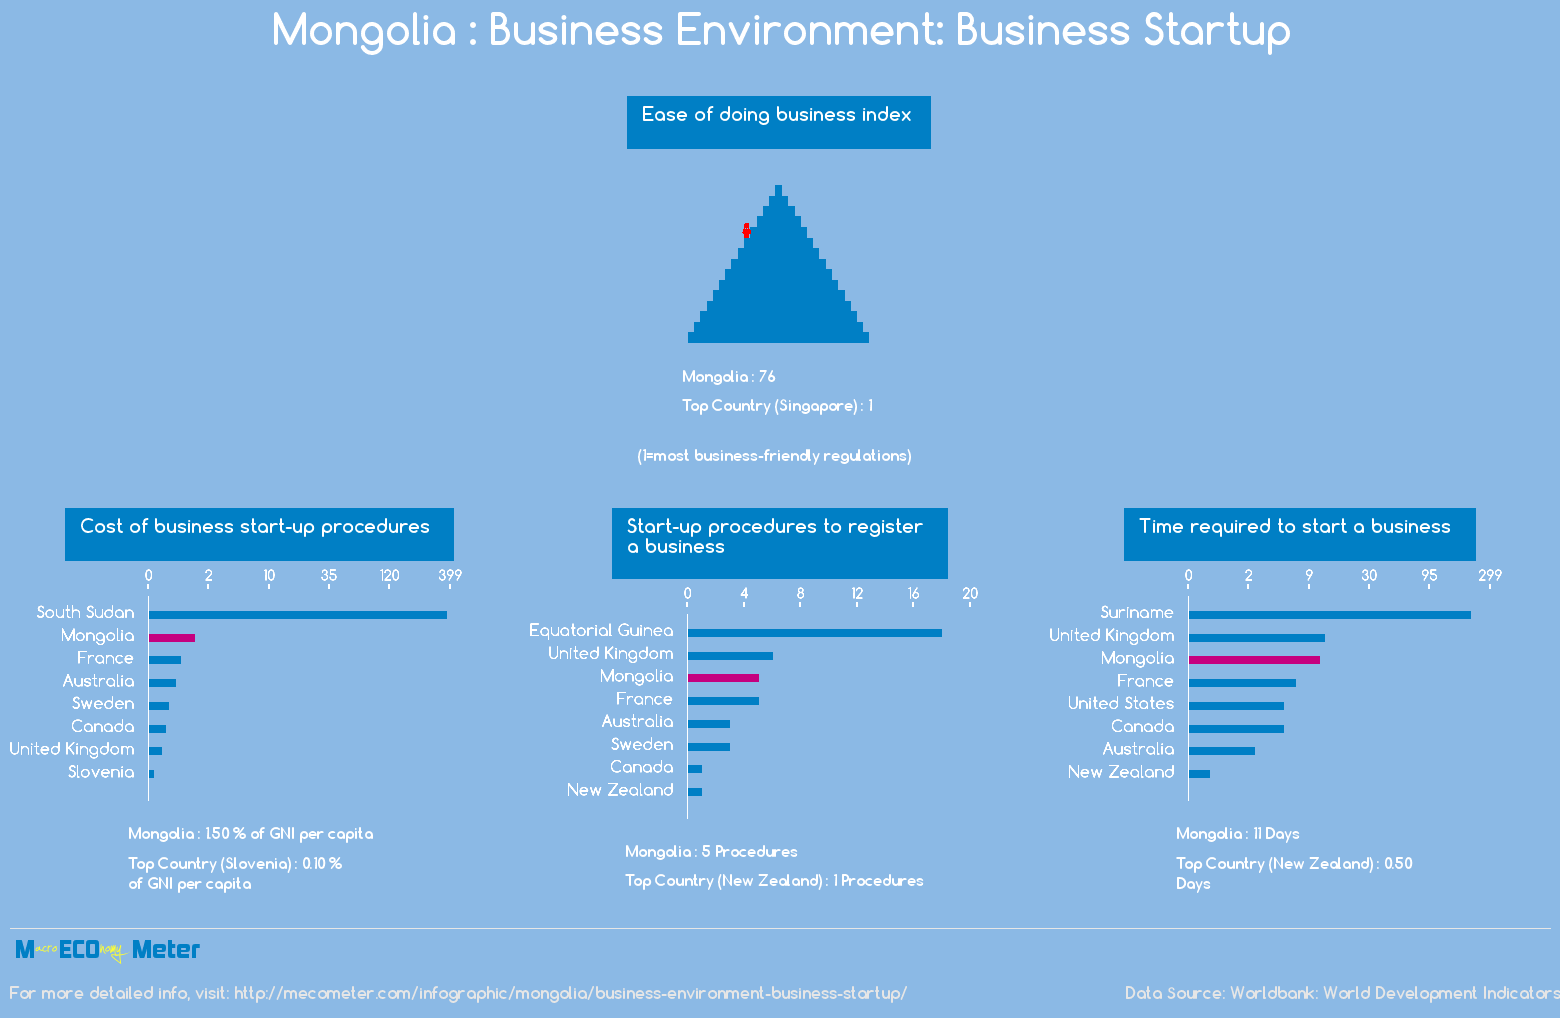 Mongolia : Business Environment: Business Startup